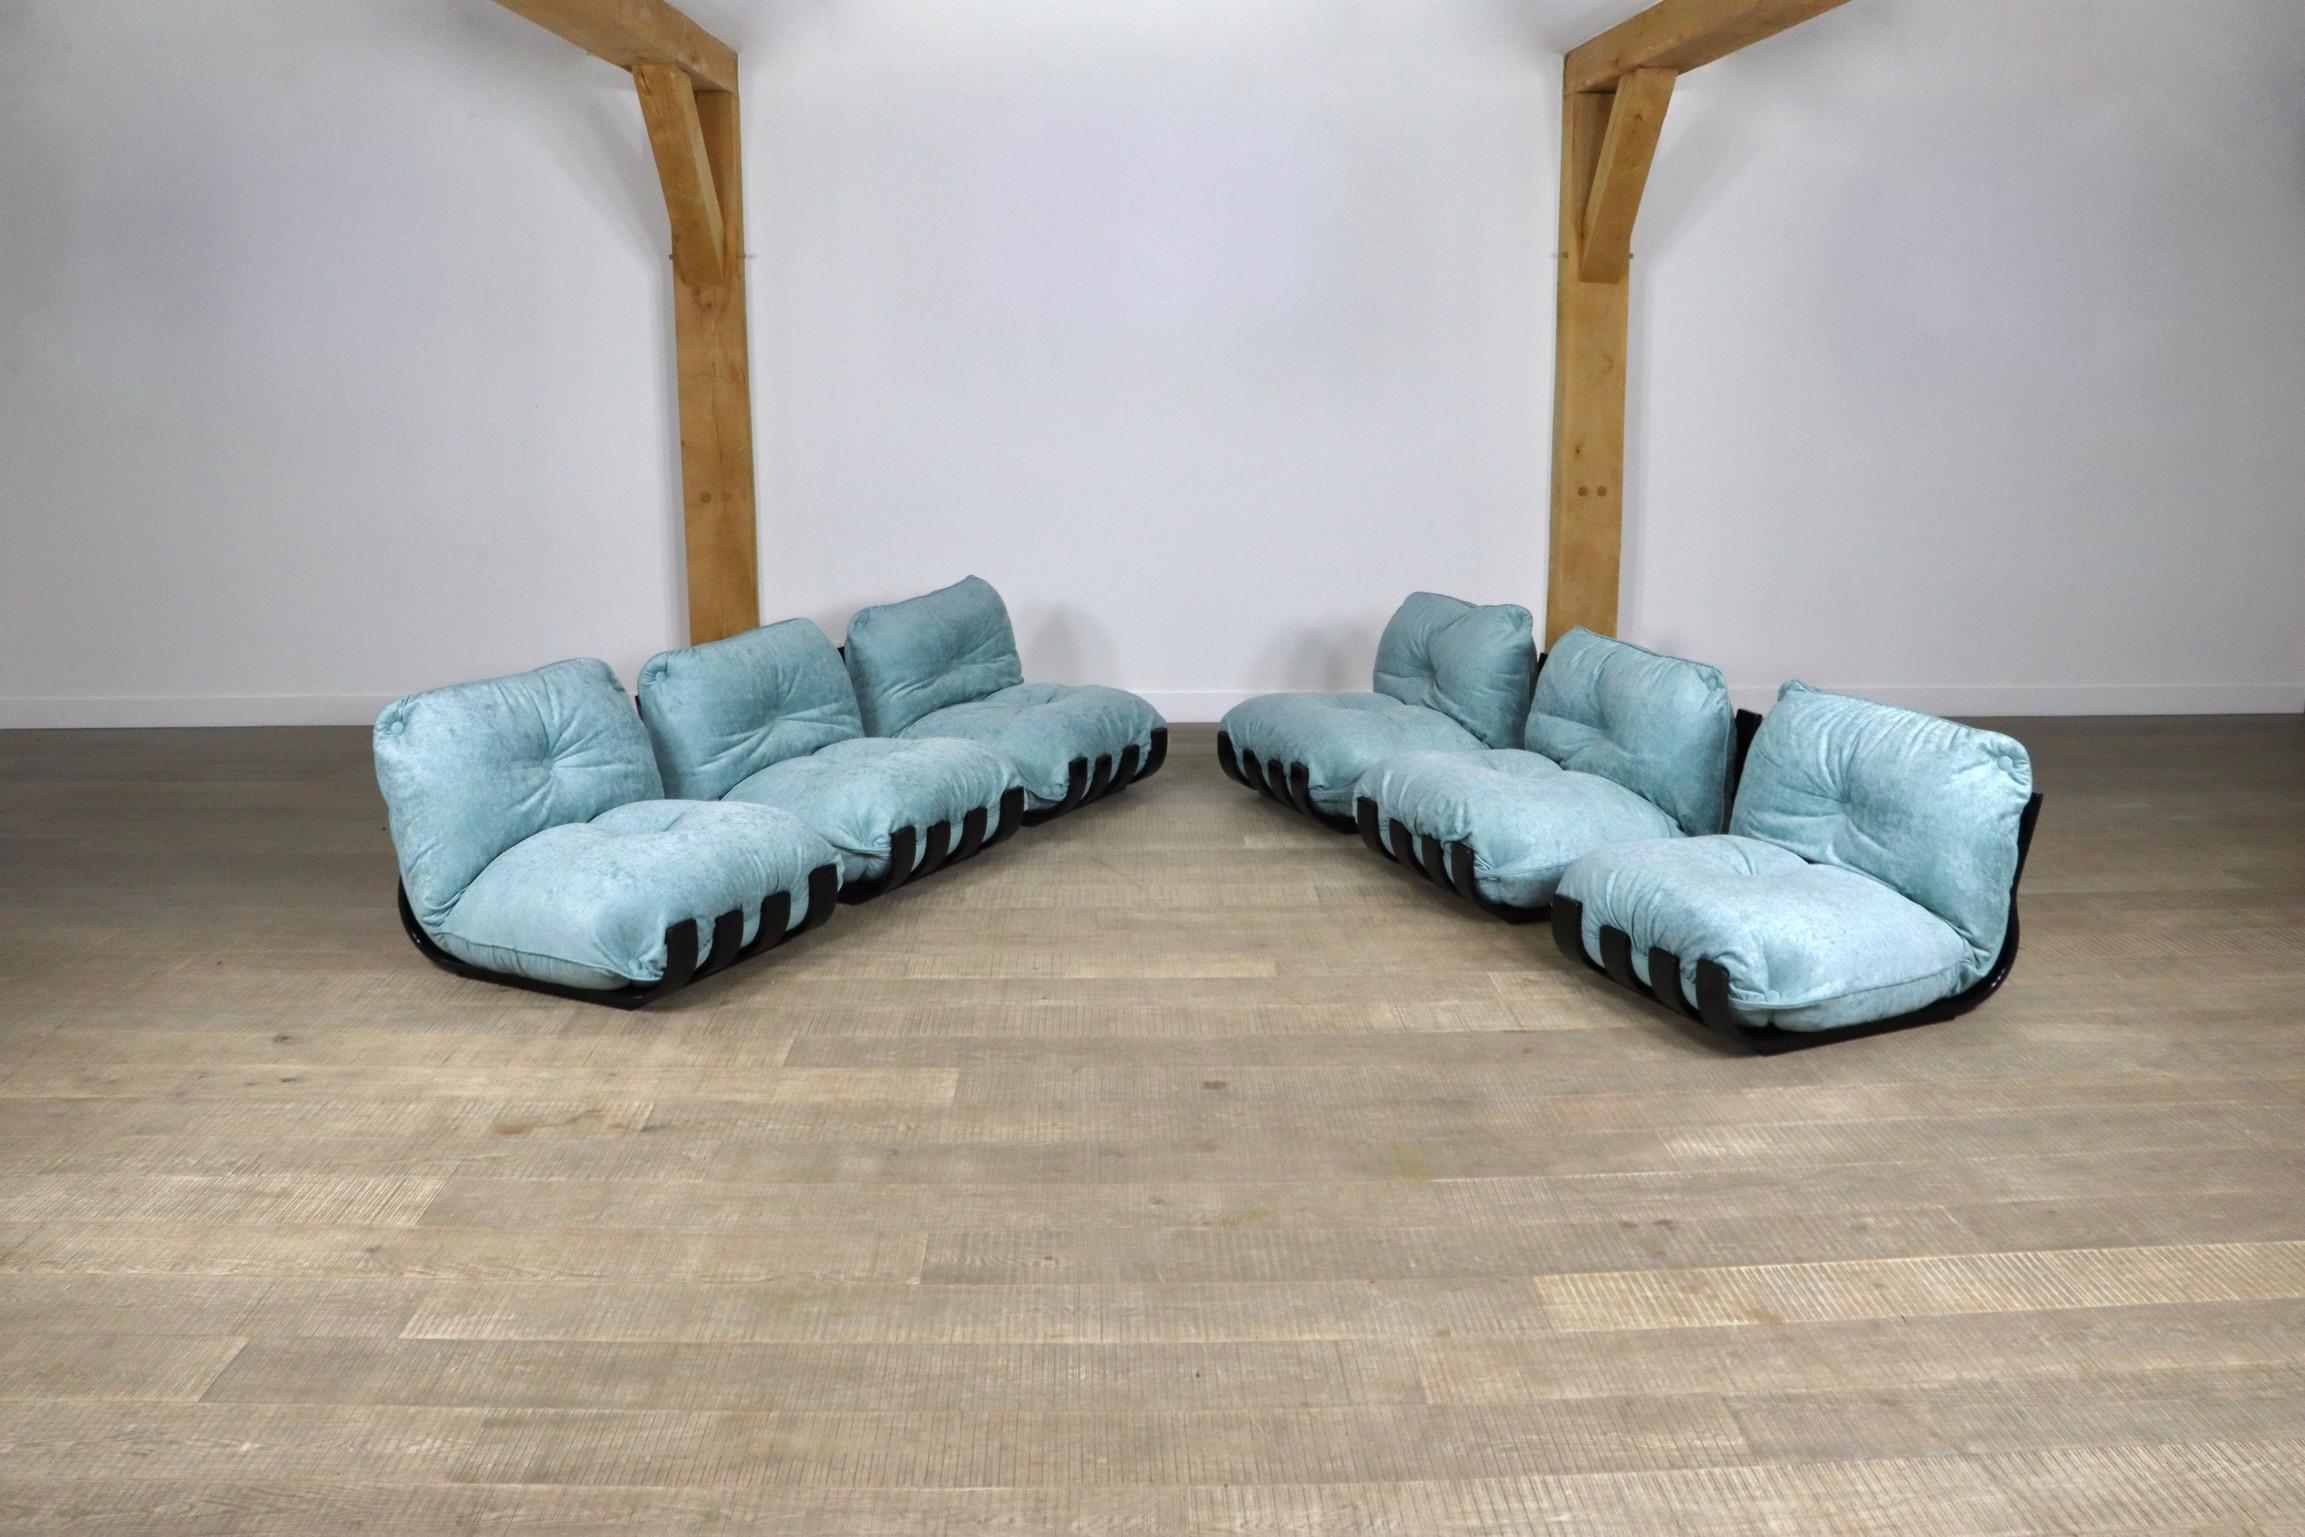 Incredible Gran Visir sectional sofa by Luciano Frigerio, Italy 1970s. The sculptural black laqcuered wooden frames complemented by newly upholstered blue velvet cushions in the most beautiful way. The outstanding comfort of the chunky cushions is